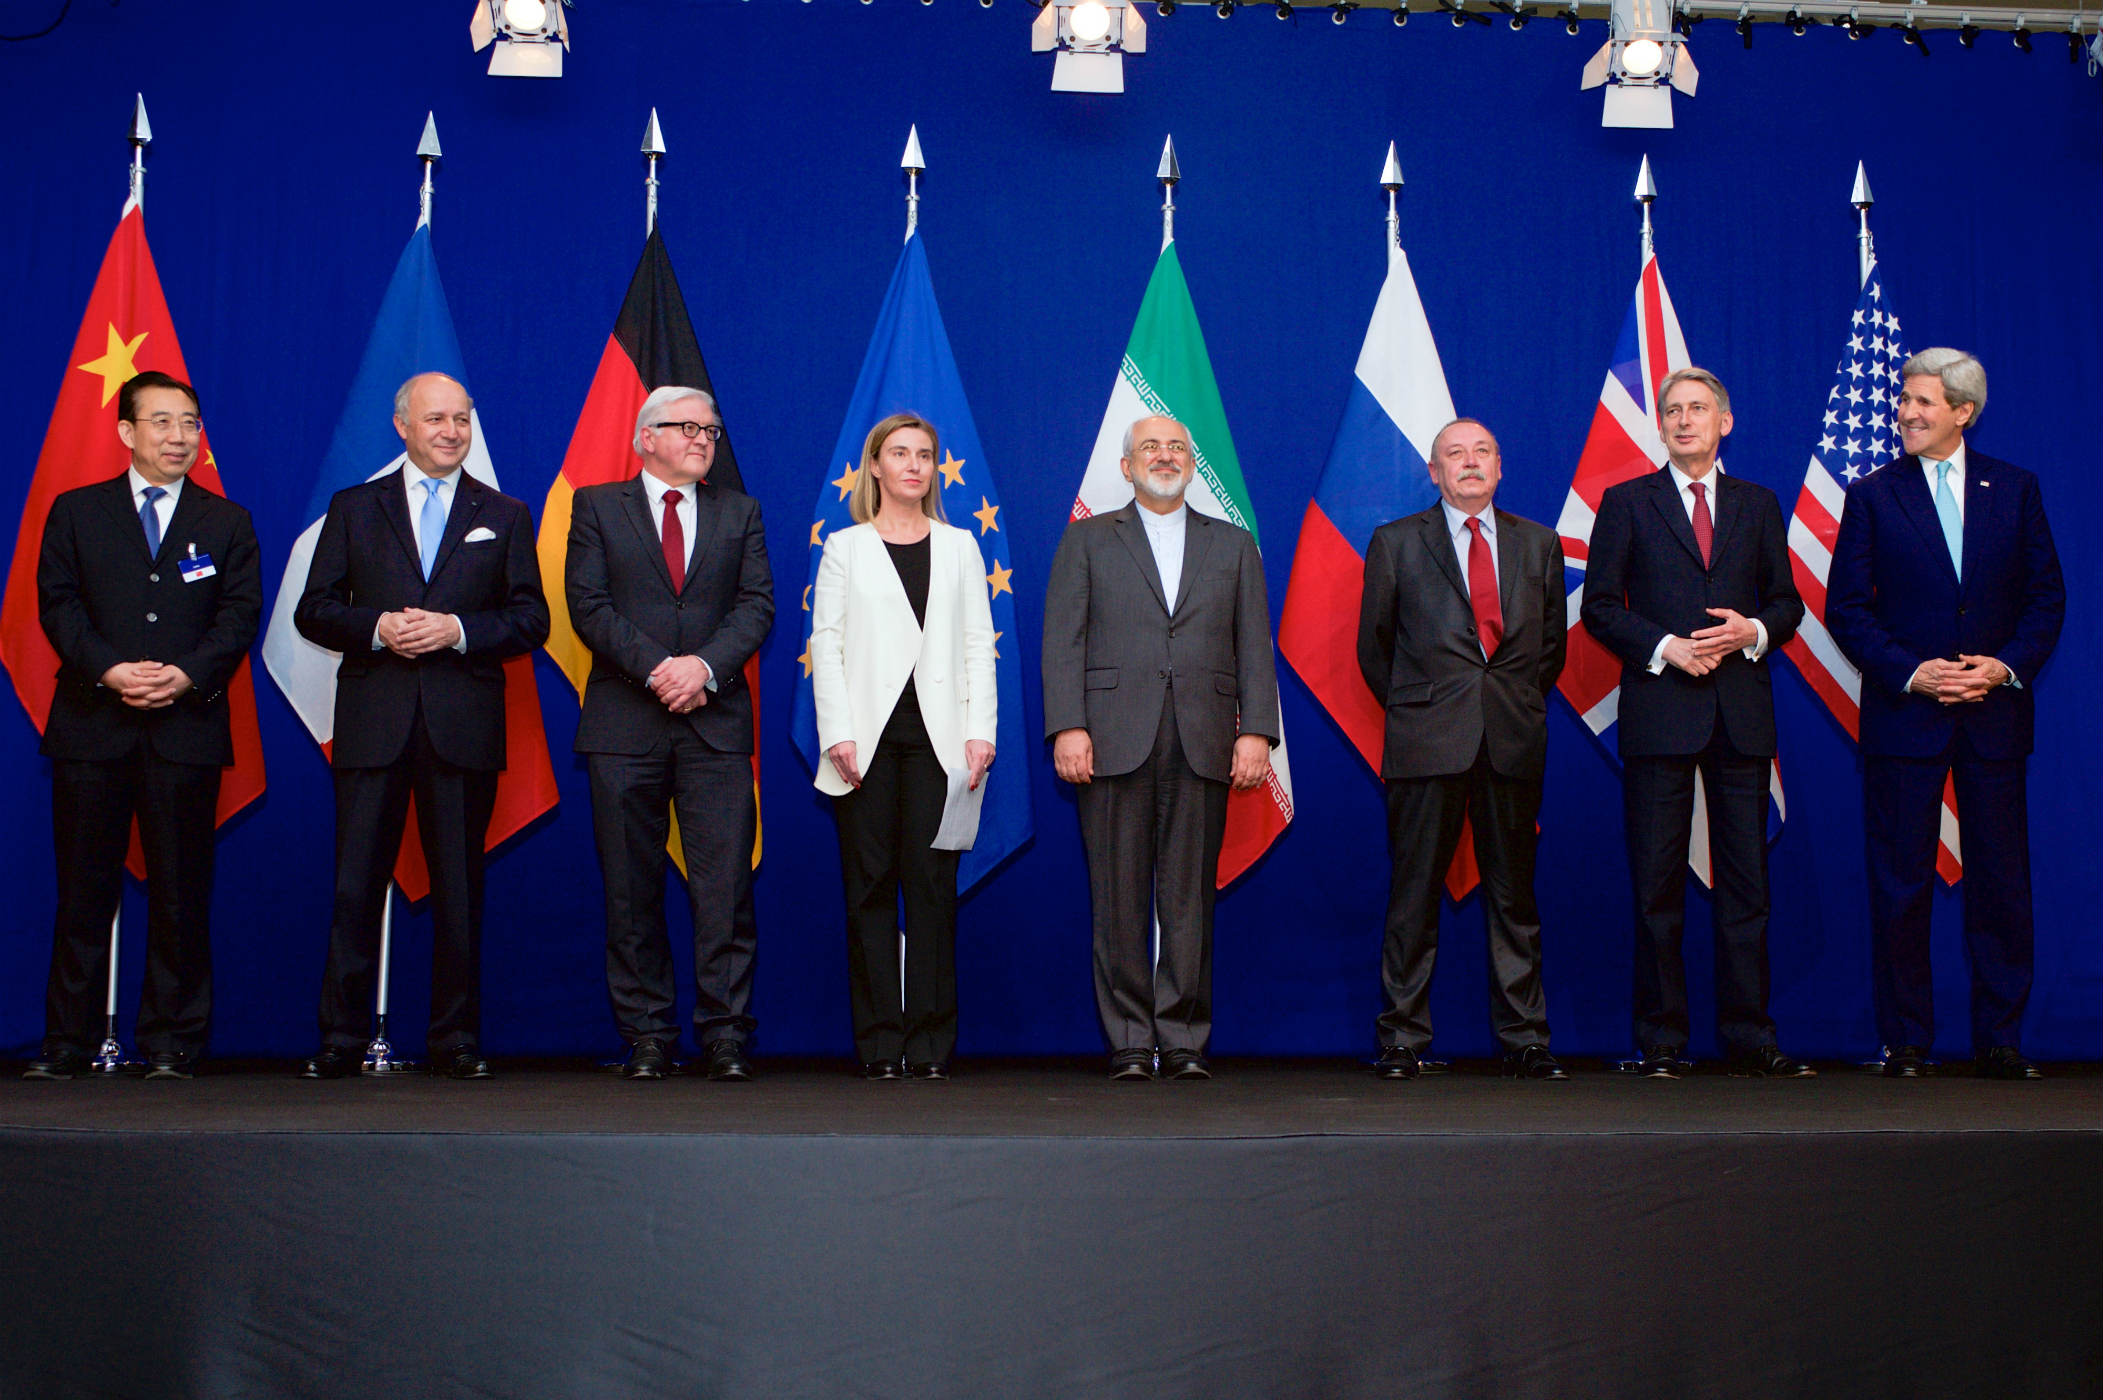 Negotiations about Iranian Nuclear Program the Ministers of Foreign Affairs and Other Officials of the P51 and Ministers of Foreign Affairs of Iran and EU in Lausanne